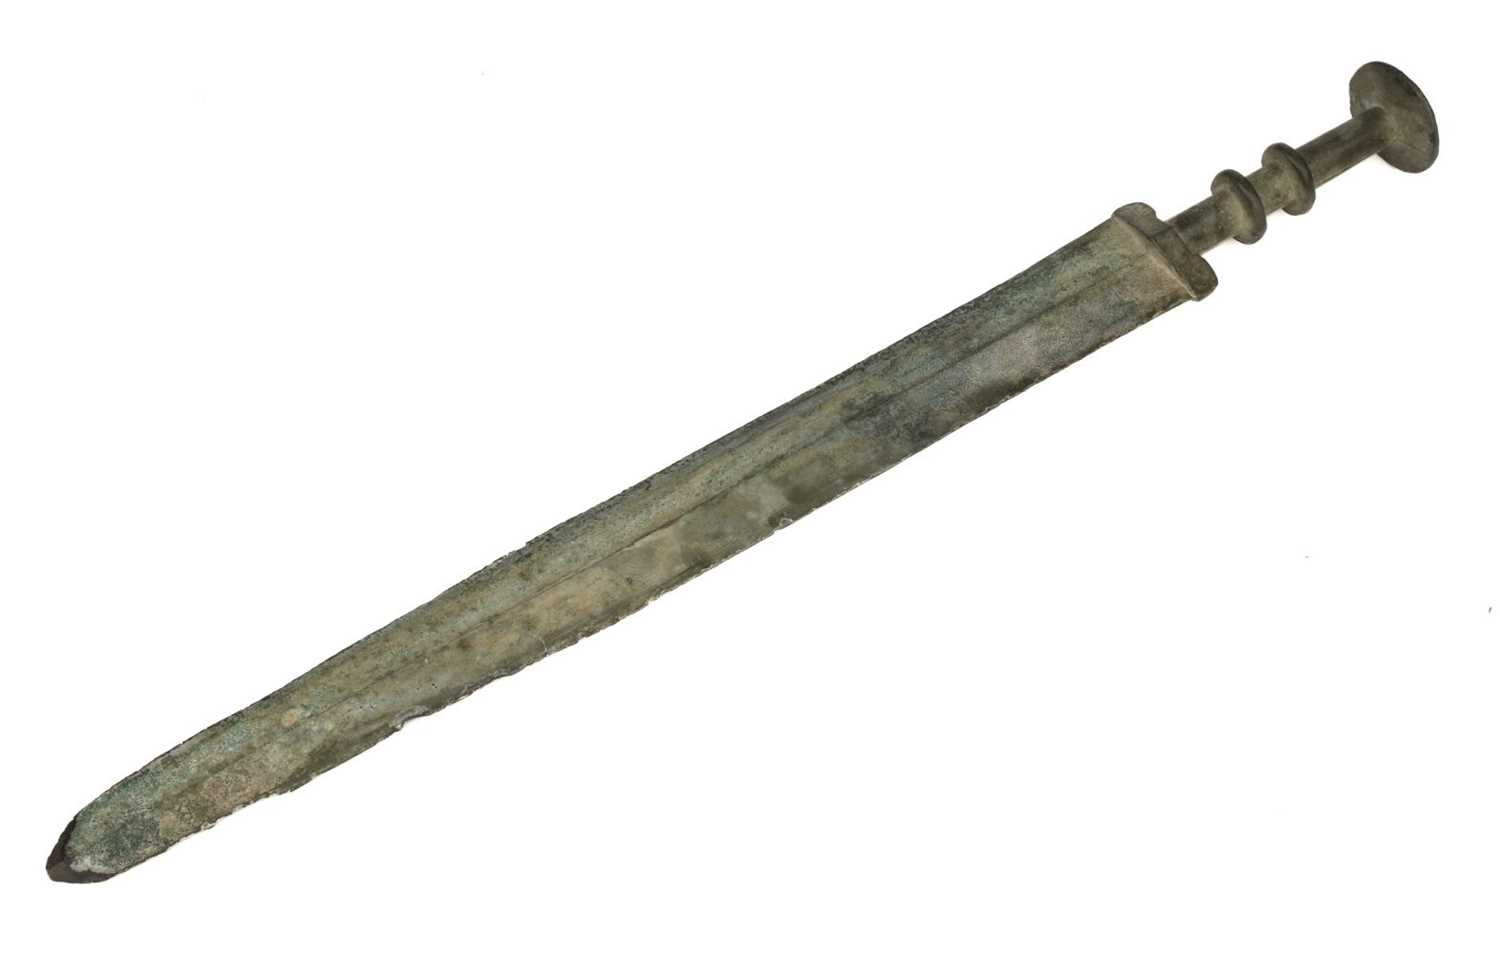 Lot 475 - Chinese Dagger. A Chinese dagger from the Henan probably Mid to Late Second B.C.